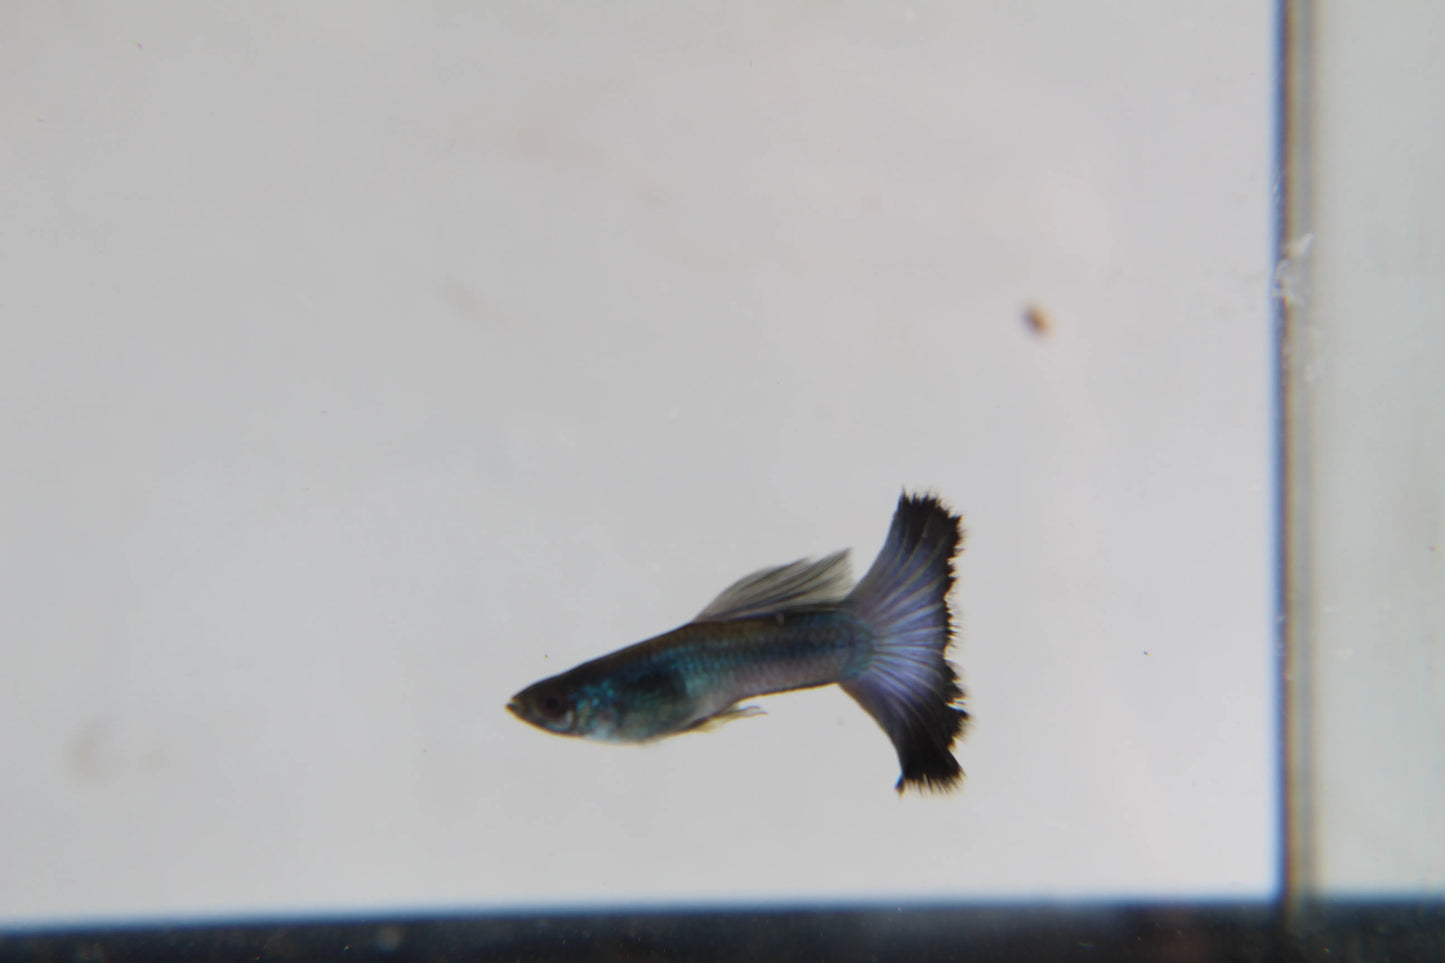 Blue Moscow Guppy Pair